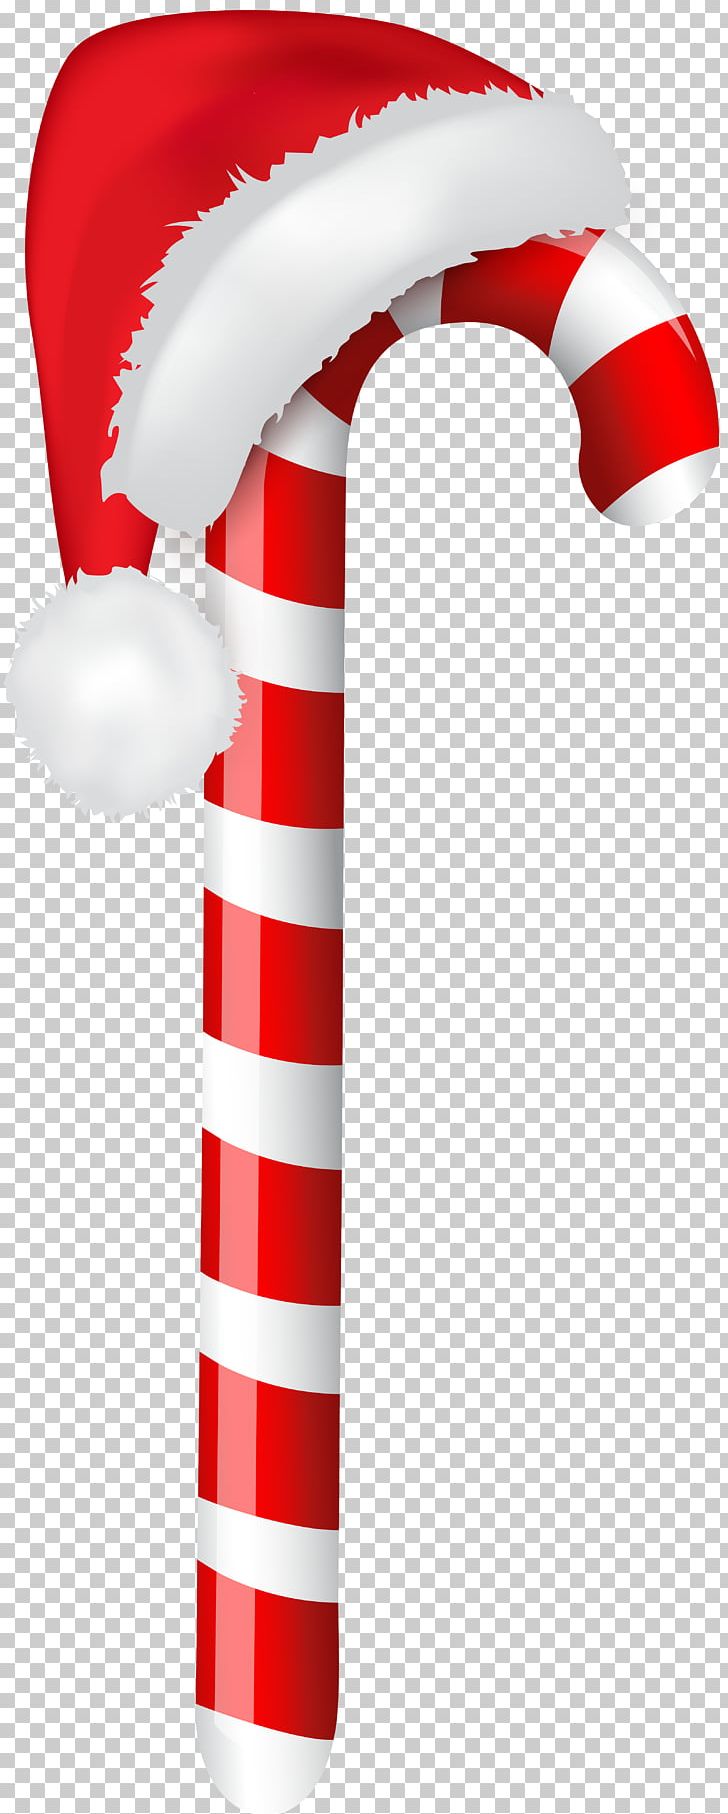 Candy Cane Santa Claus Christmas PNG, Clipart, Candy, Candy Cane, Christmas, Christmas Candy Cane, Christmas Clipart Free PNG Download